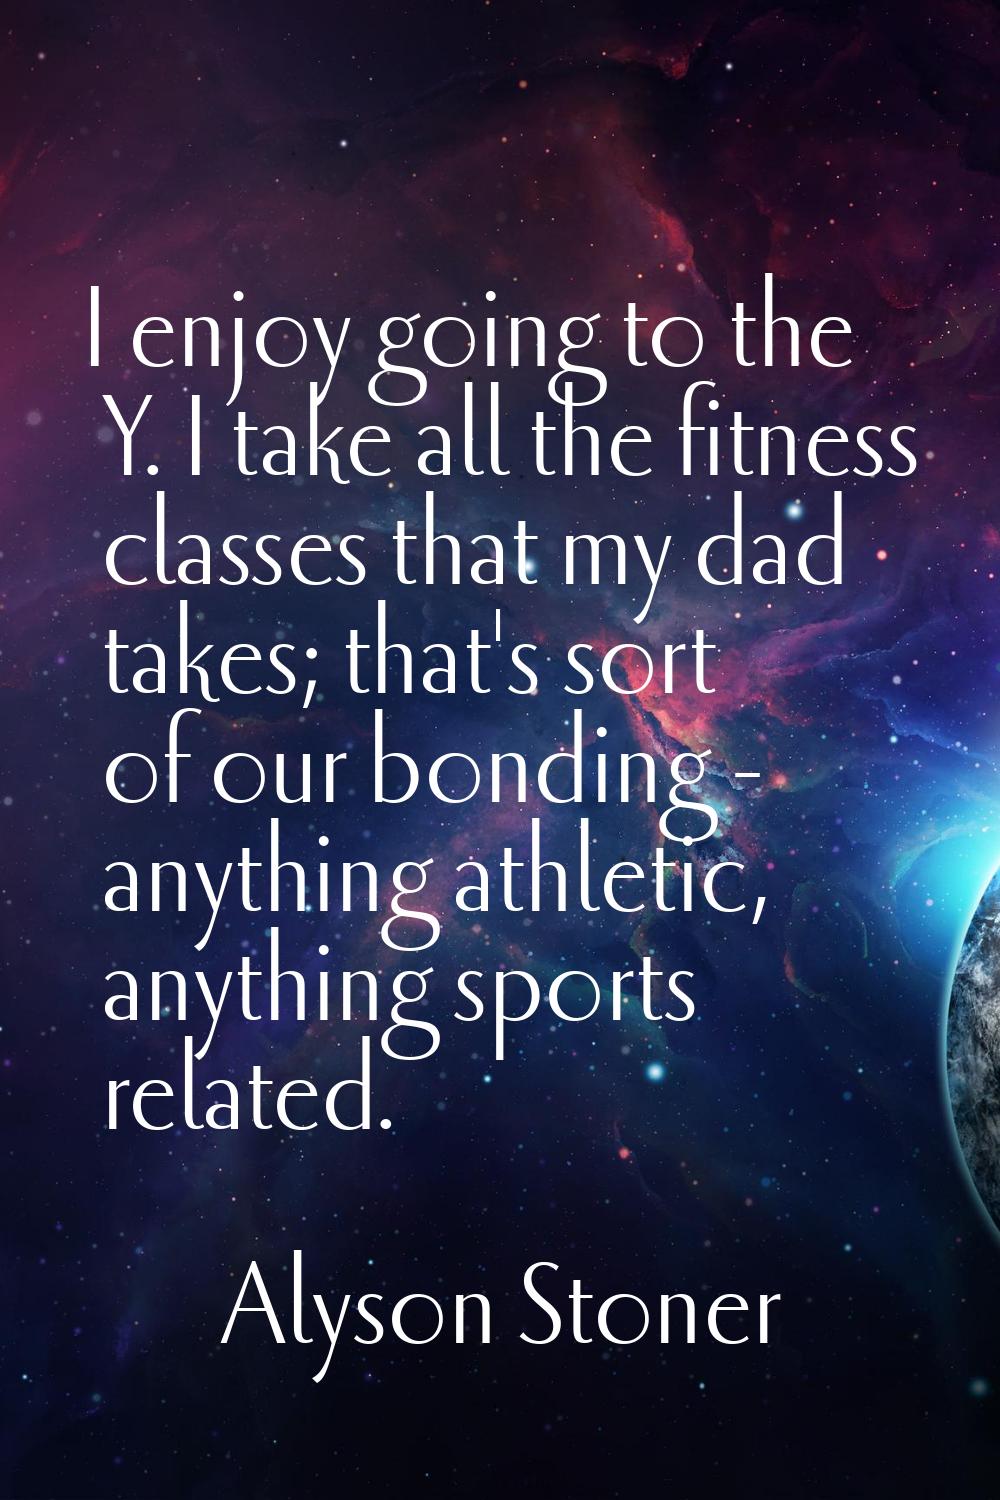 I enjoy going to the Y. I take all the fitness classes that my dad takes; that's sort of our bondin